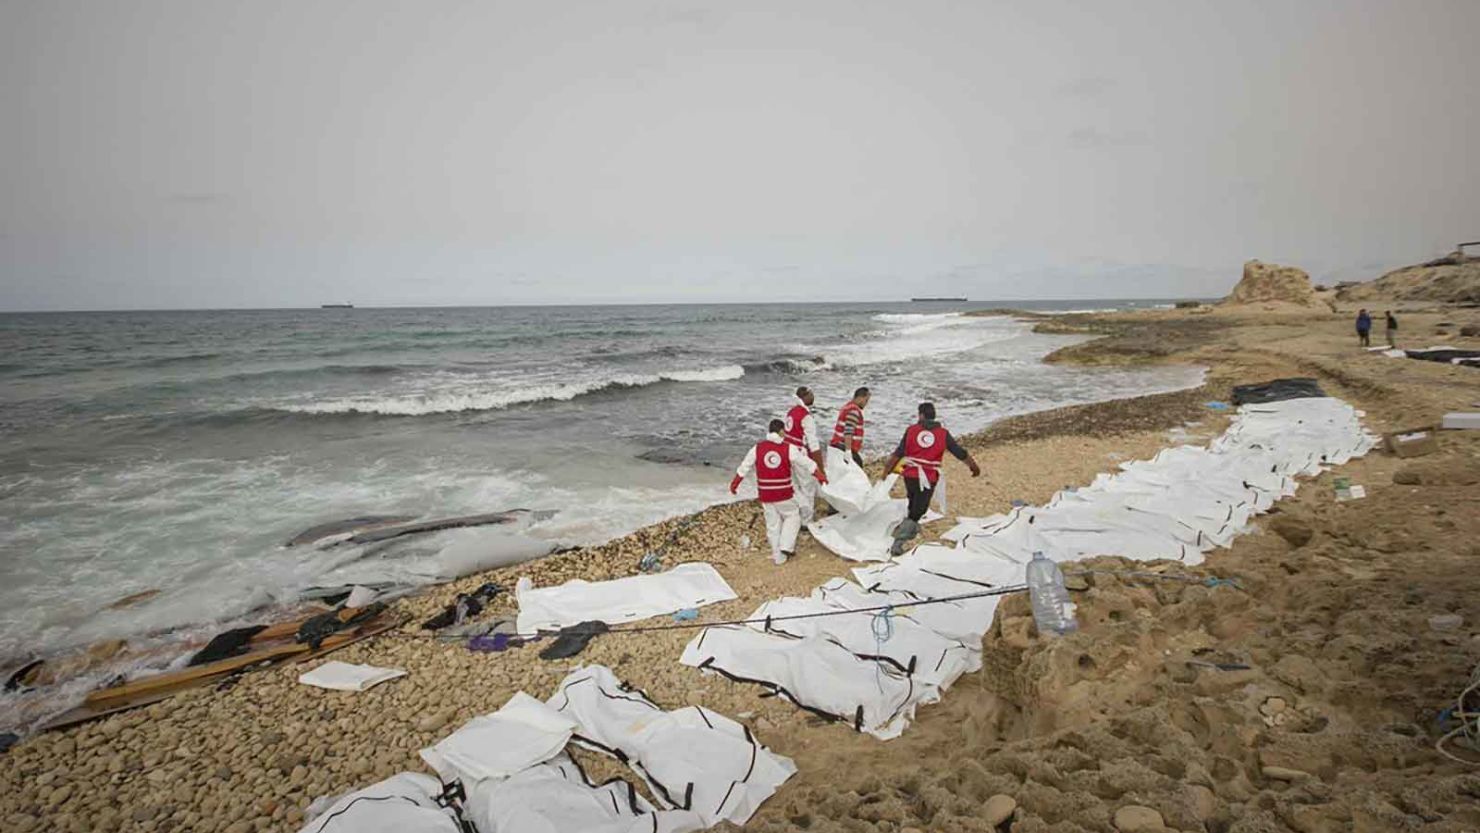 The IFRC for the Middle East and North Africa posted photographs of the recovery to its Twitter account.